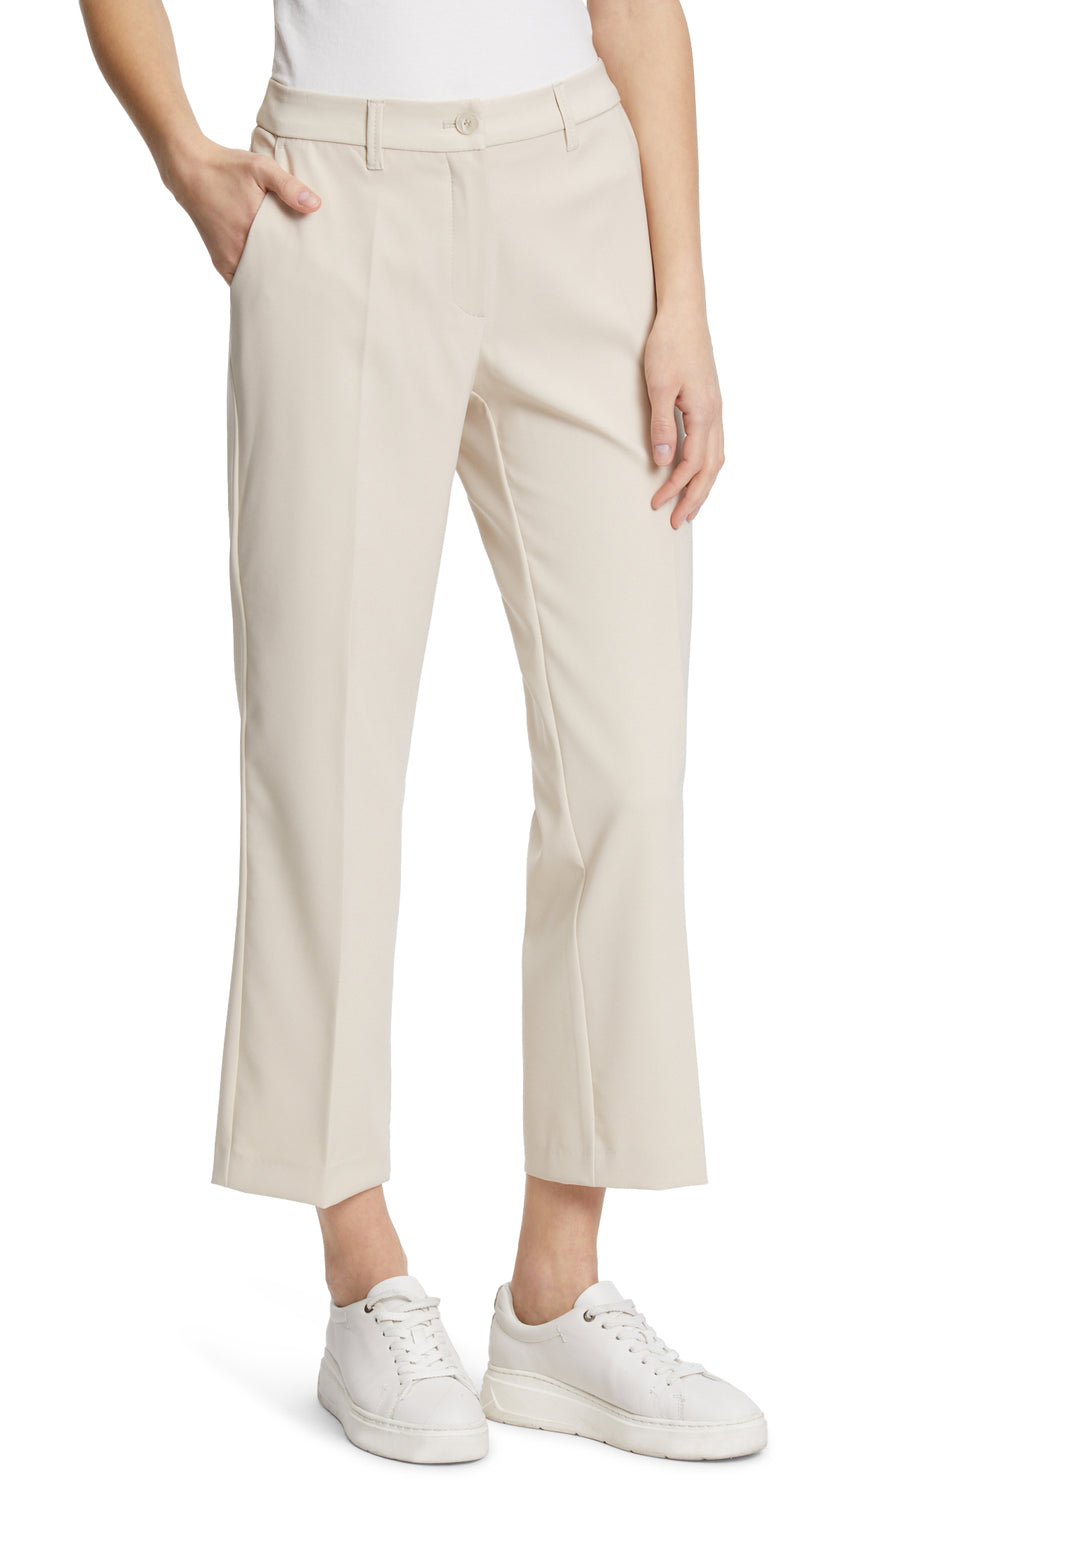 Betty Barclay 6704 1080 9104 Classic 3/4 Trouser Sand 2